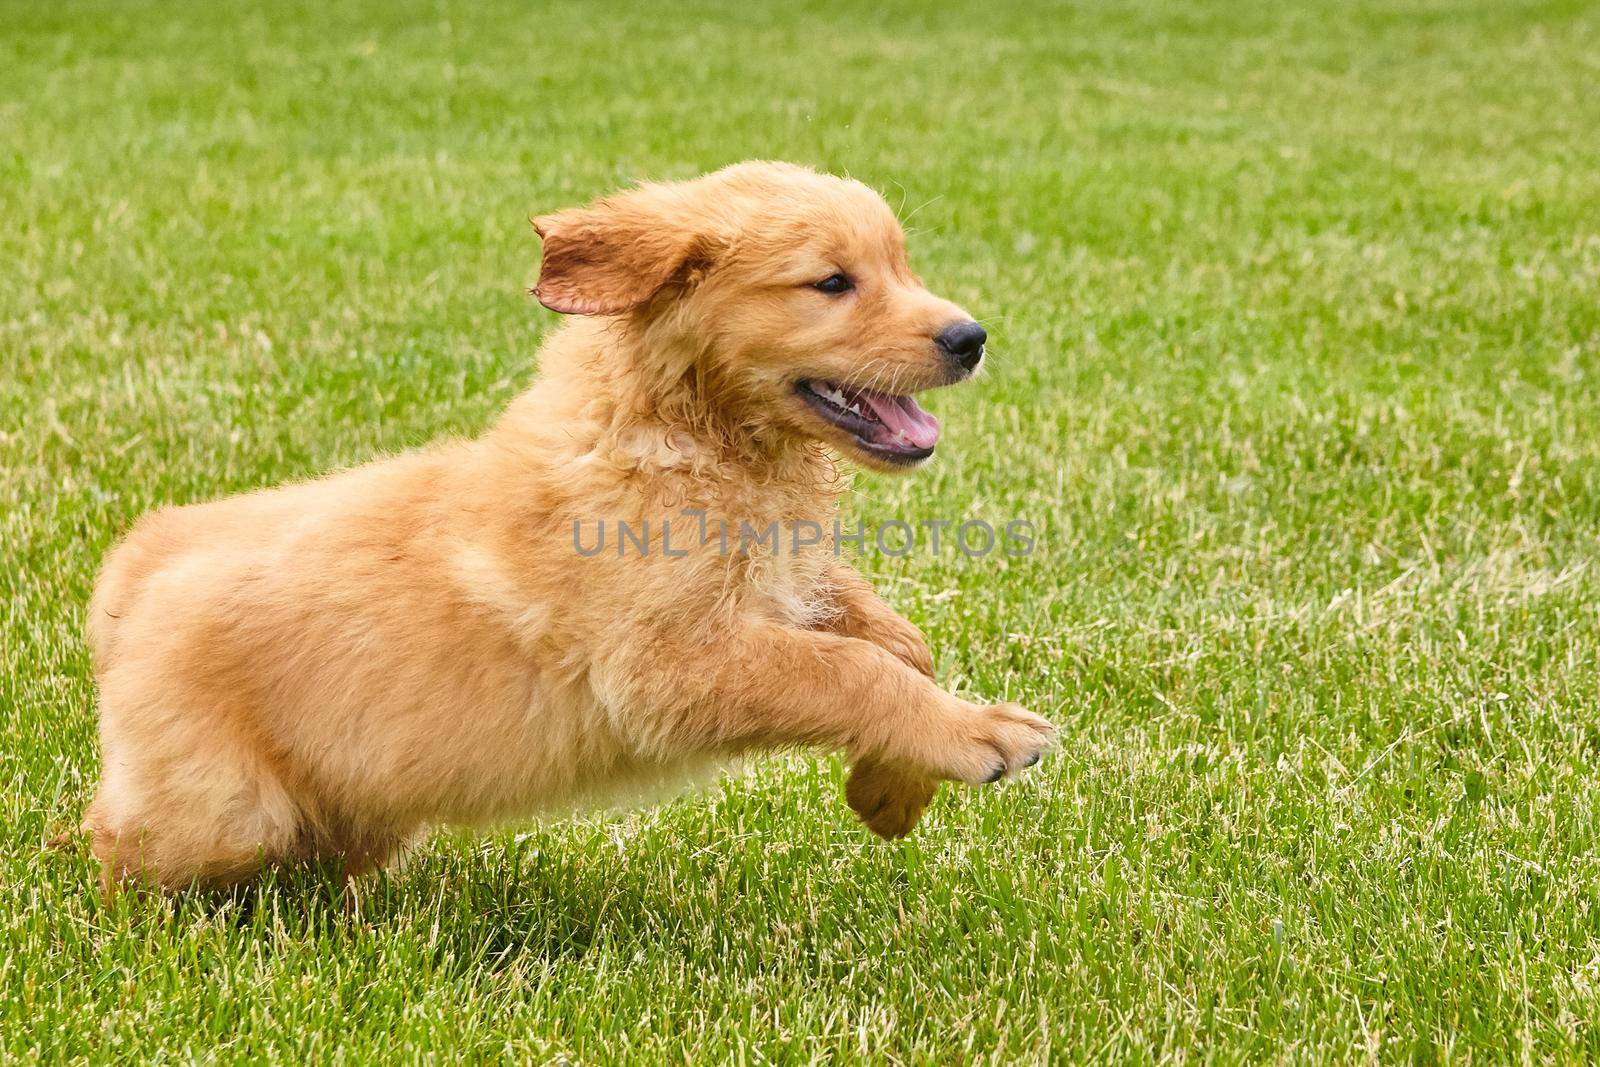 Image of Excited and energetic golden retriever puppy running through grass